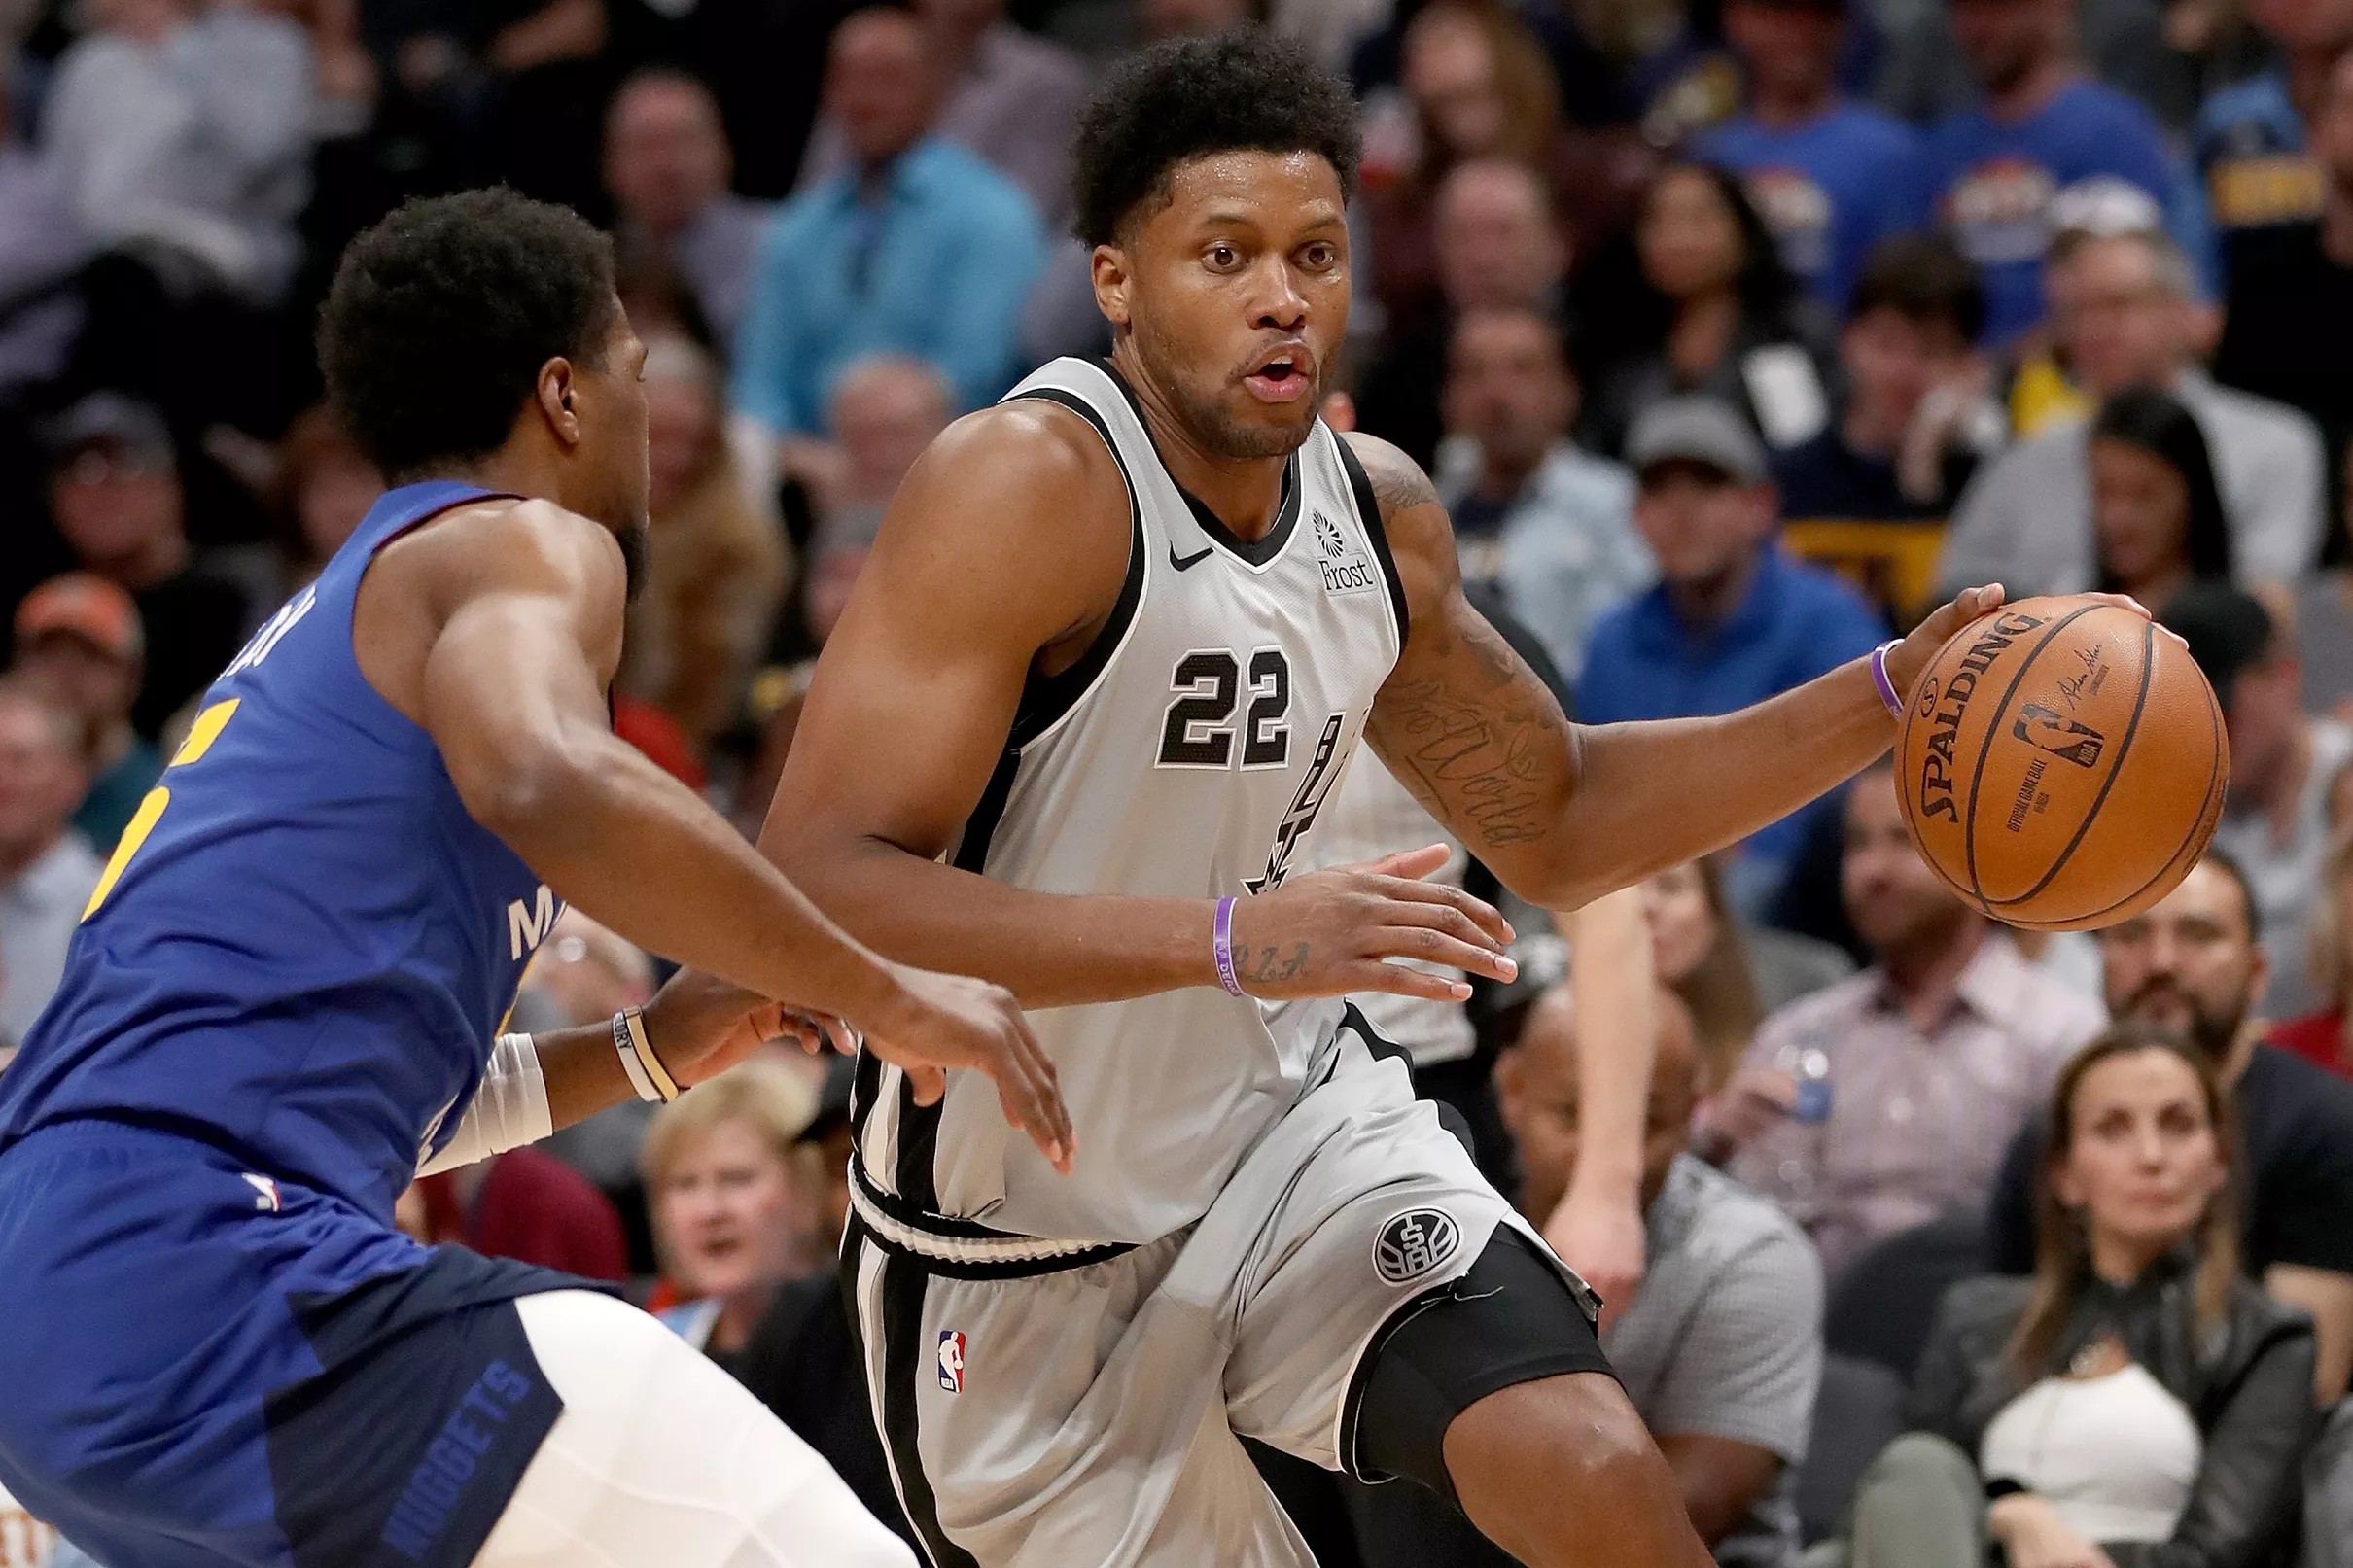 Examining the Spurs’ salary cap situation for the 2019-2020 season